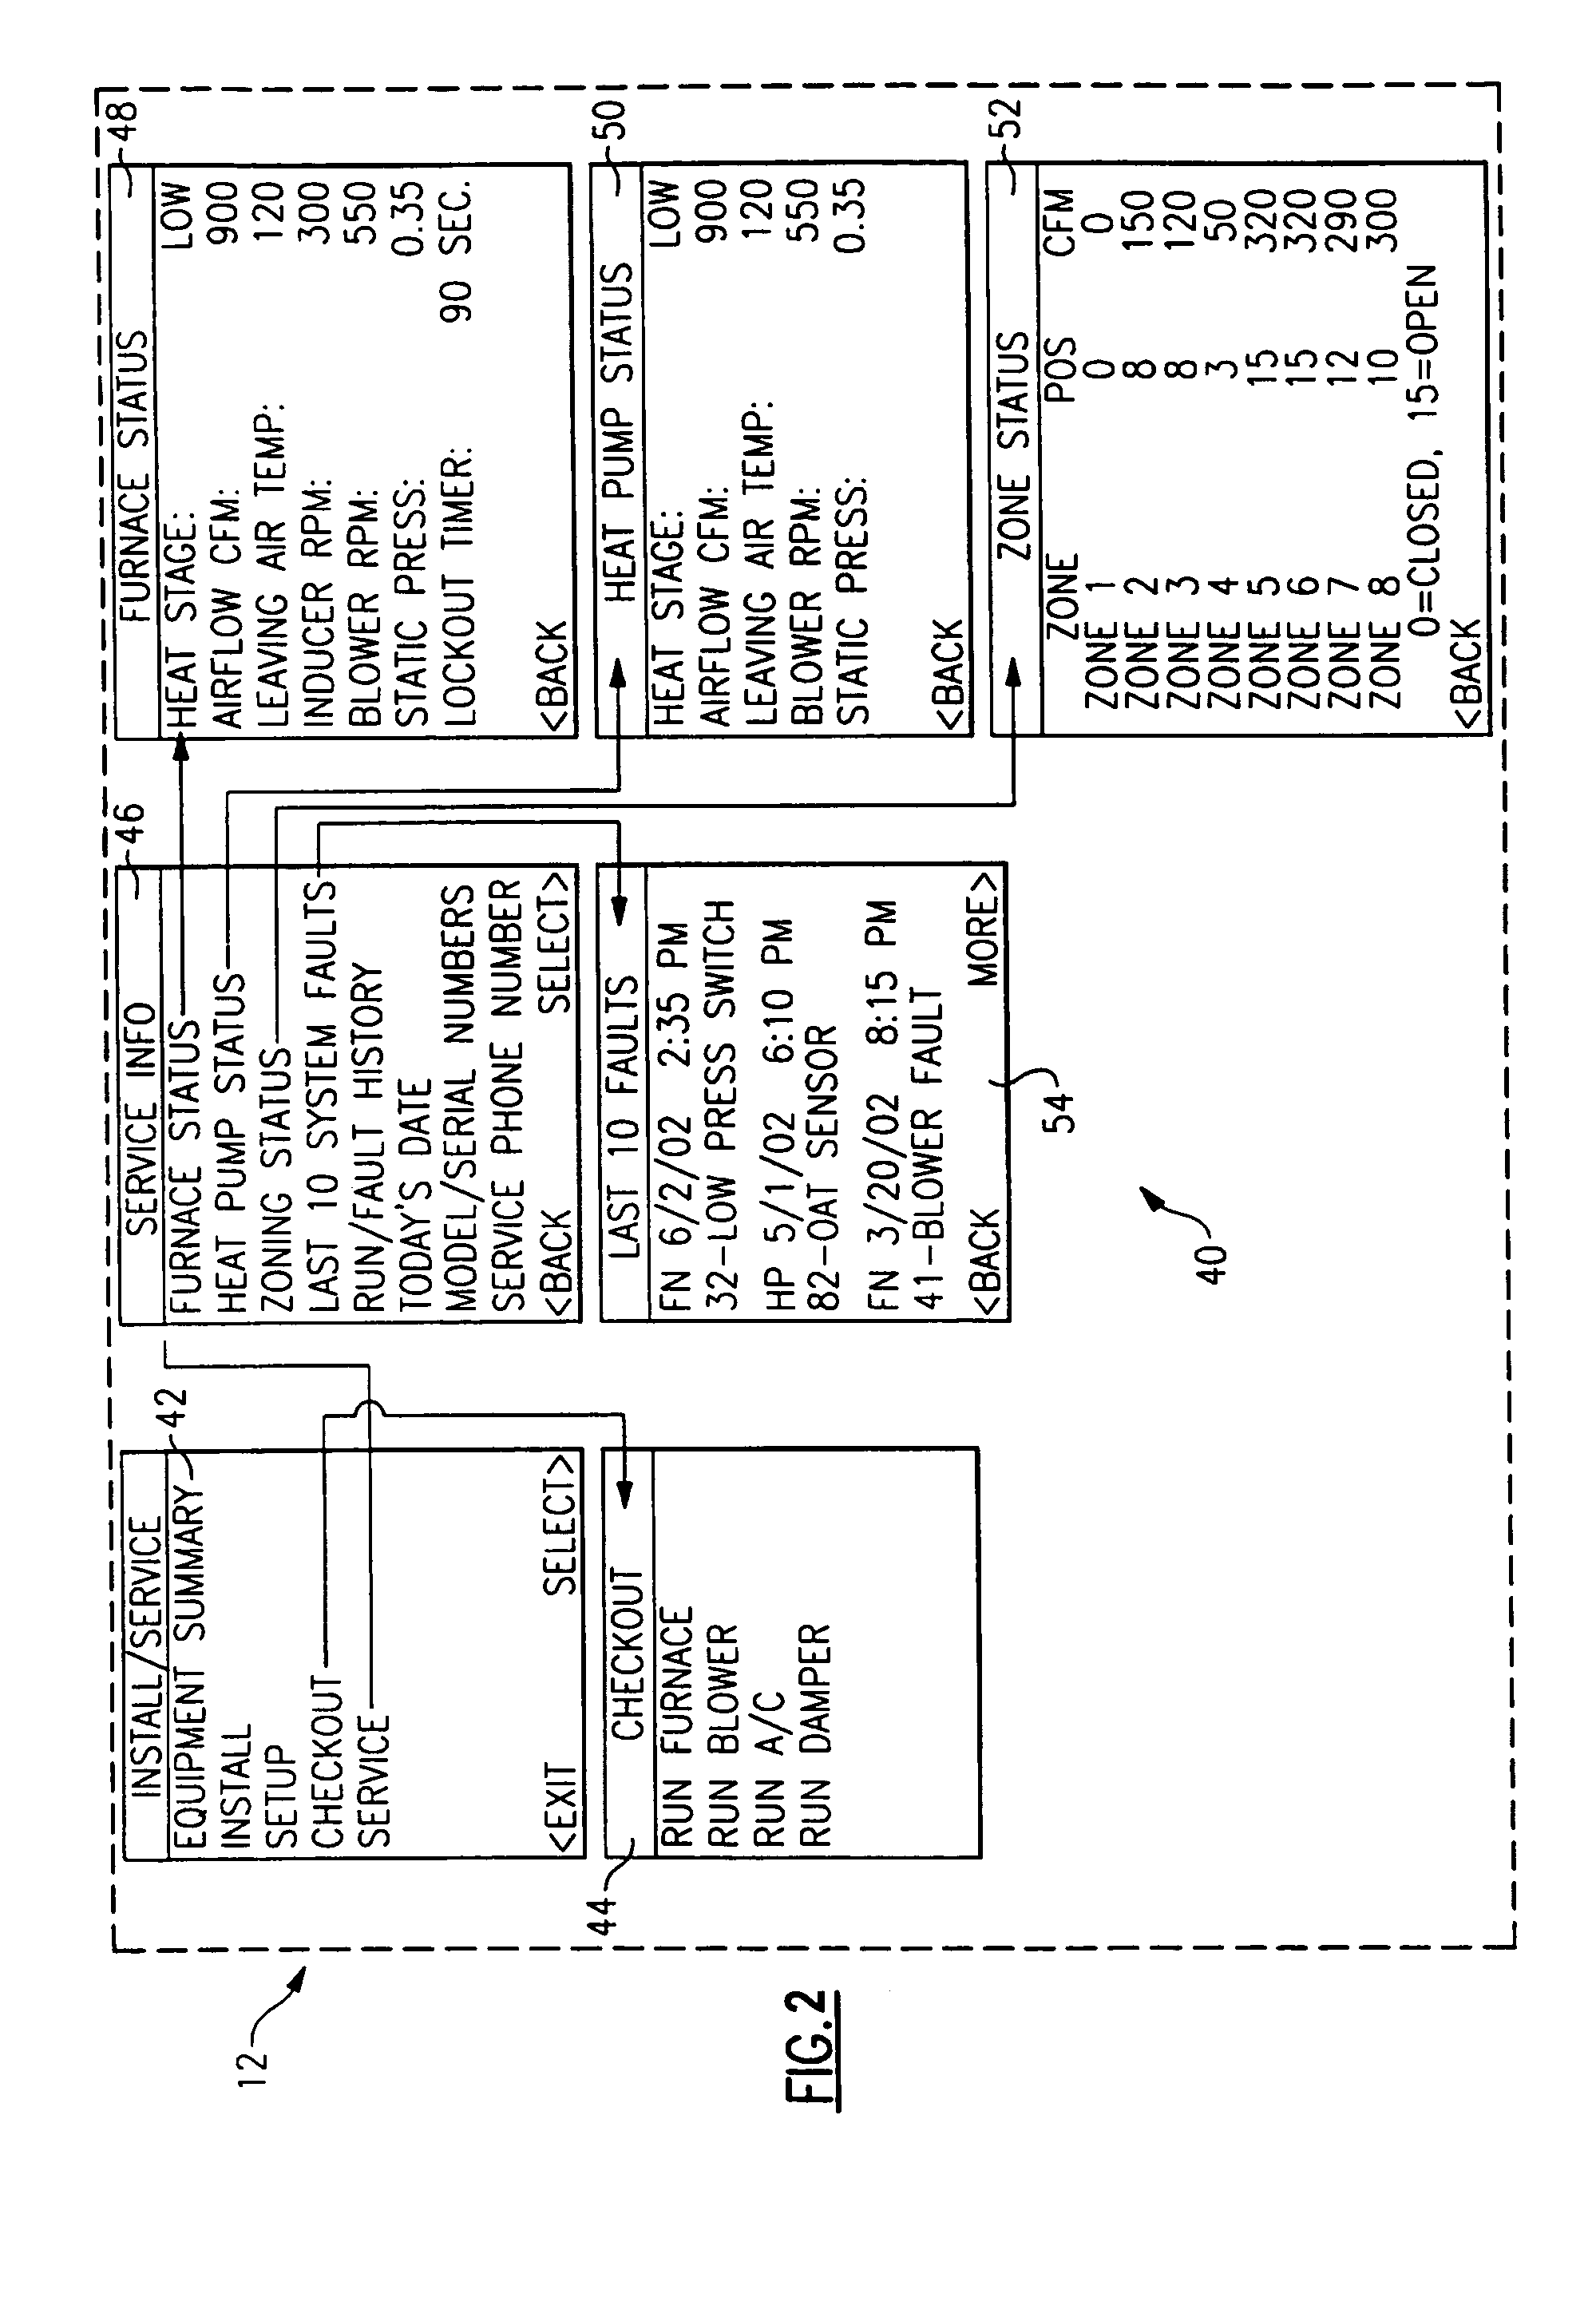 Service and diagnostic tool for HVAC systems